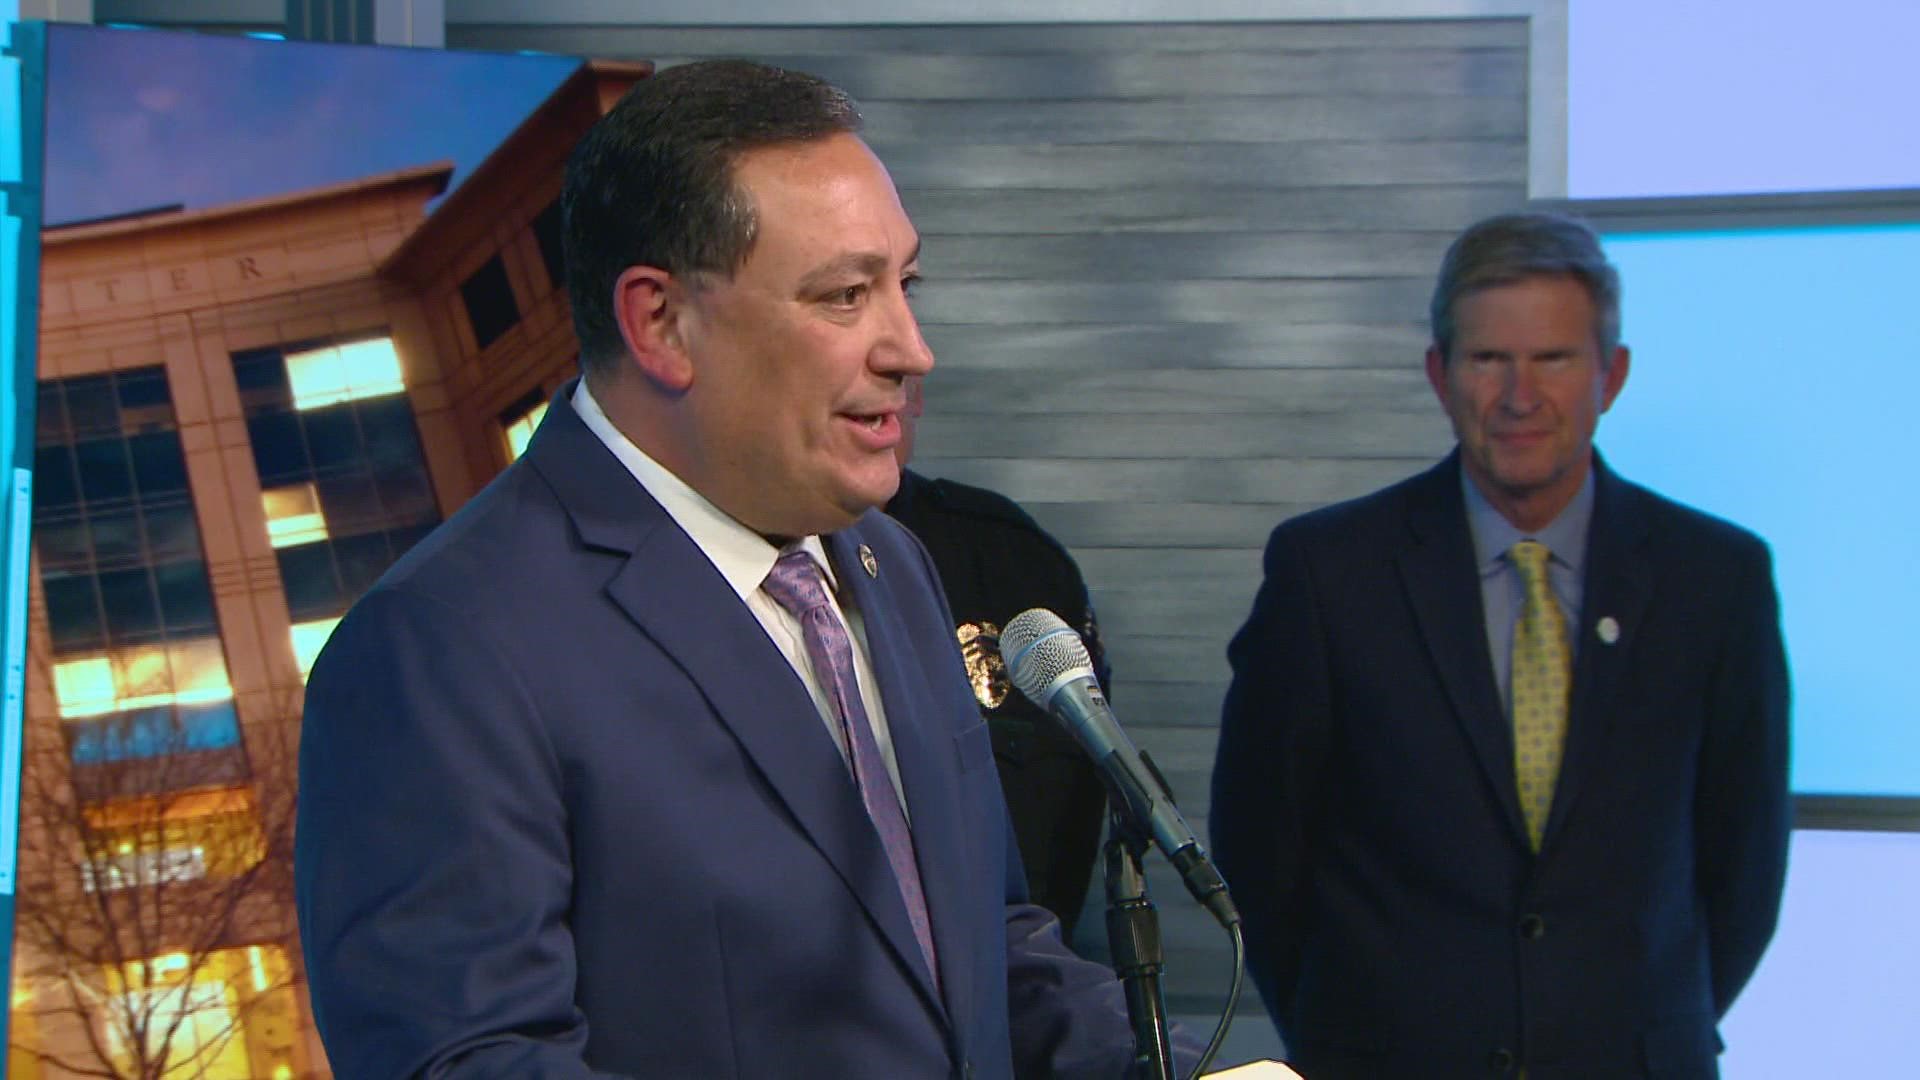 Art Acevedo has previously served as police chief in Austin, Texas, Houston and most recently Miami.